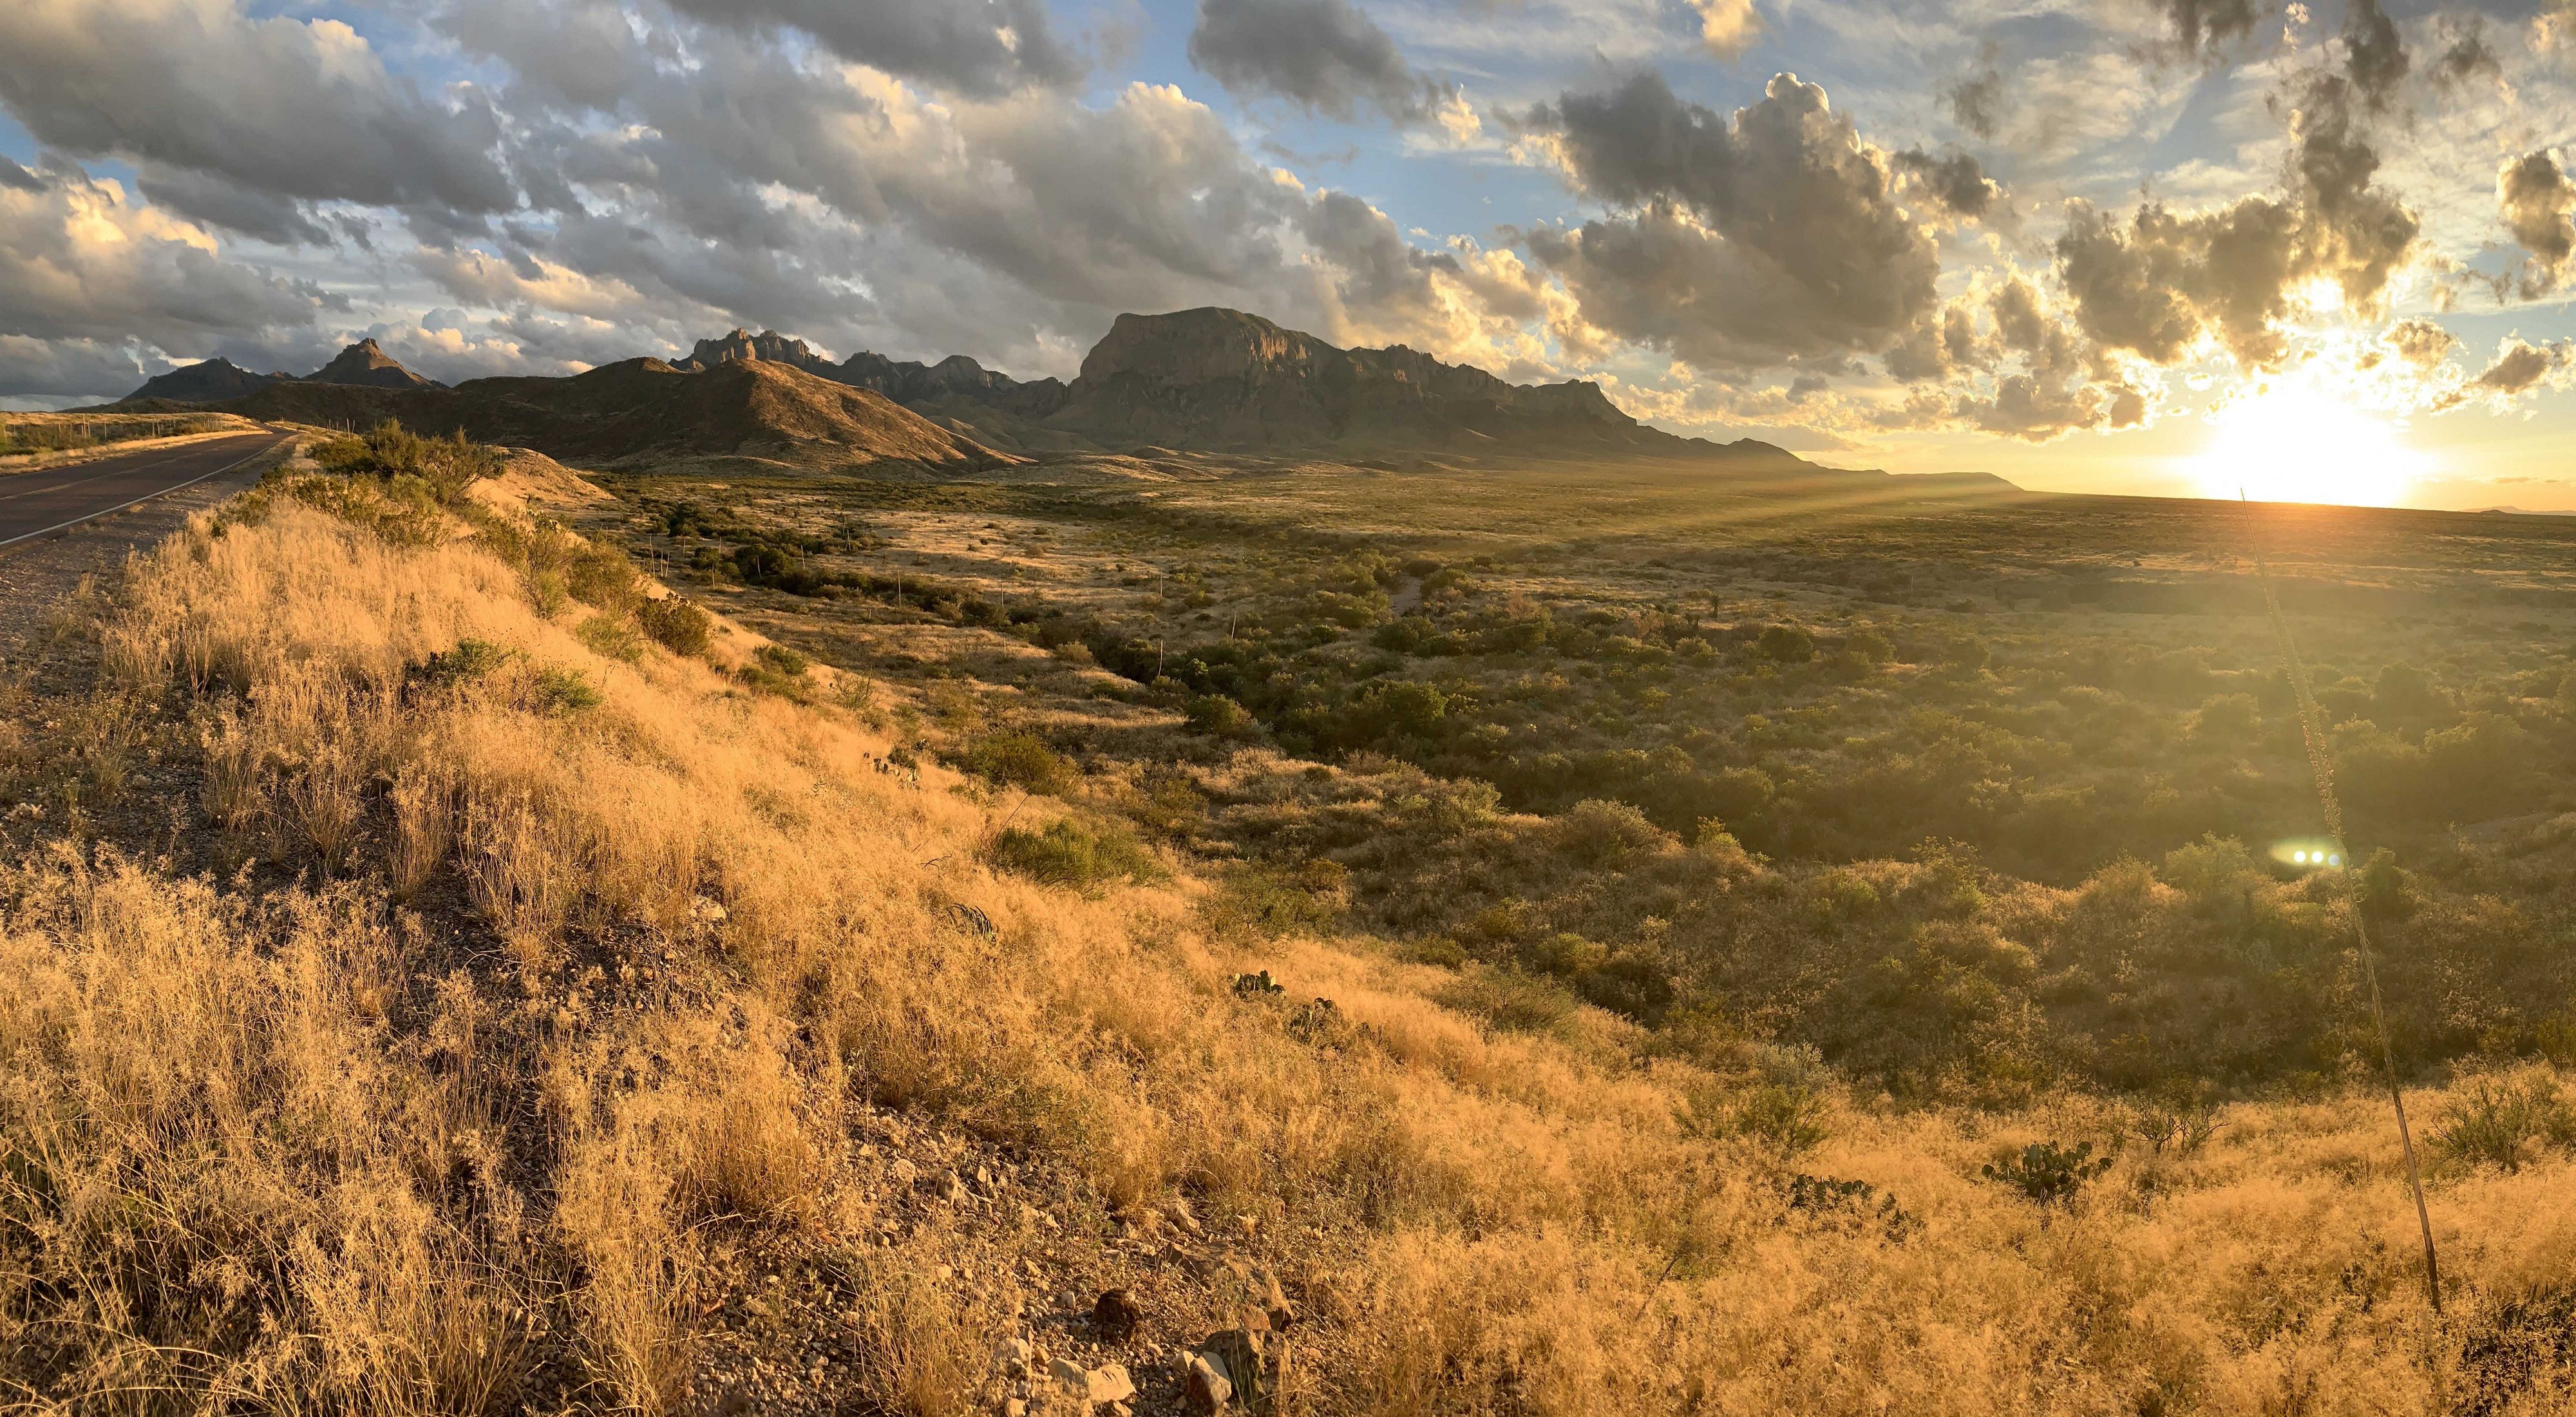 Shrubs and tall grass meet towering rocky mountains as the sun rises along a West Texas road.